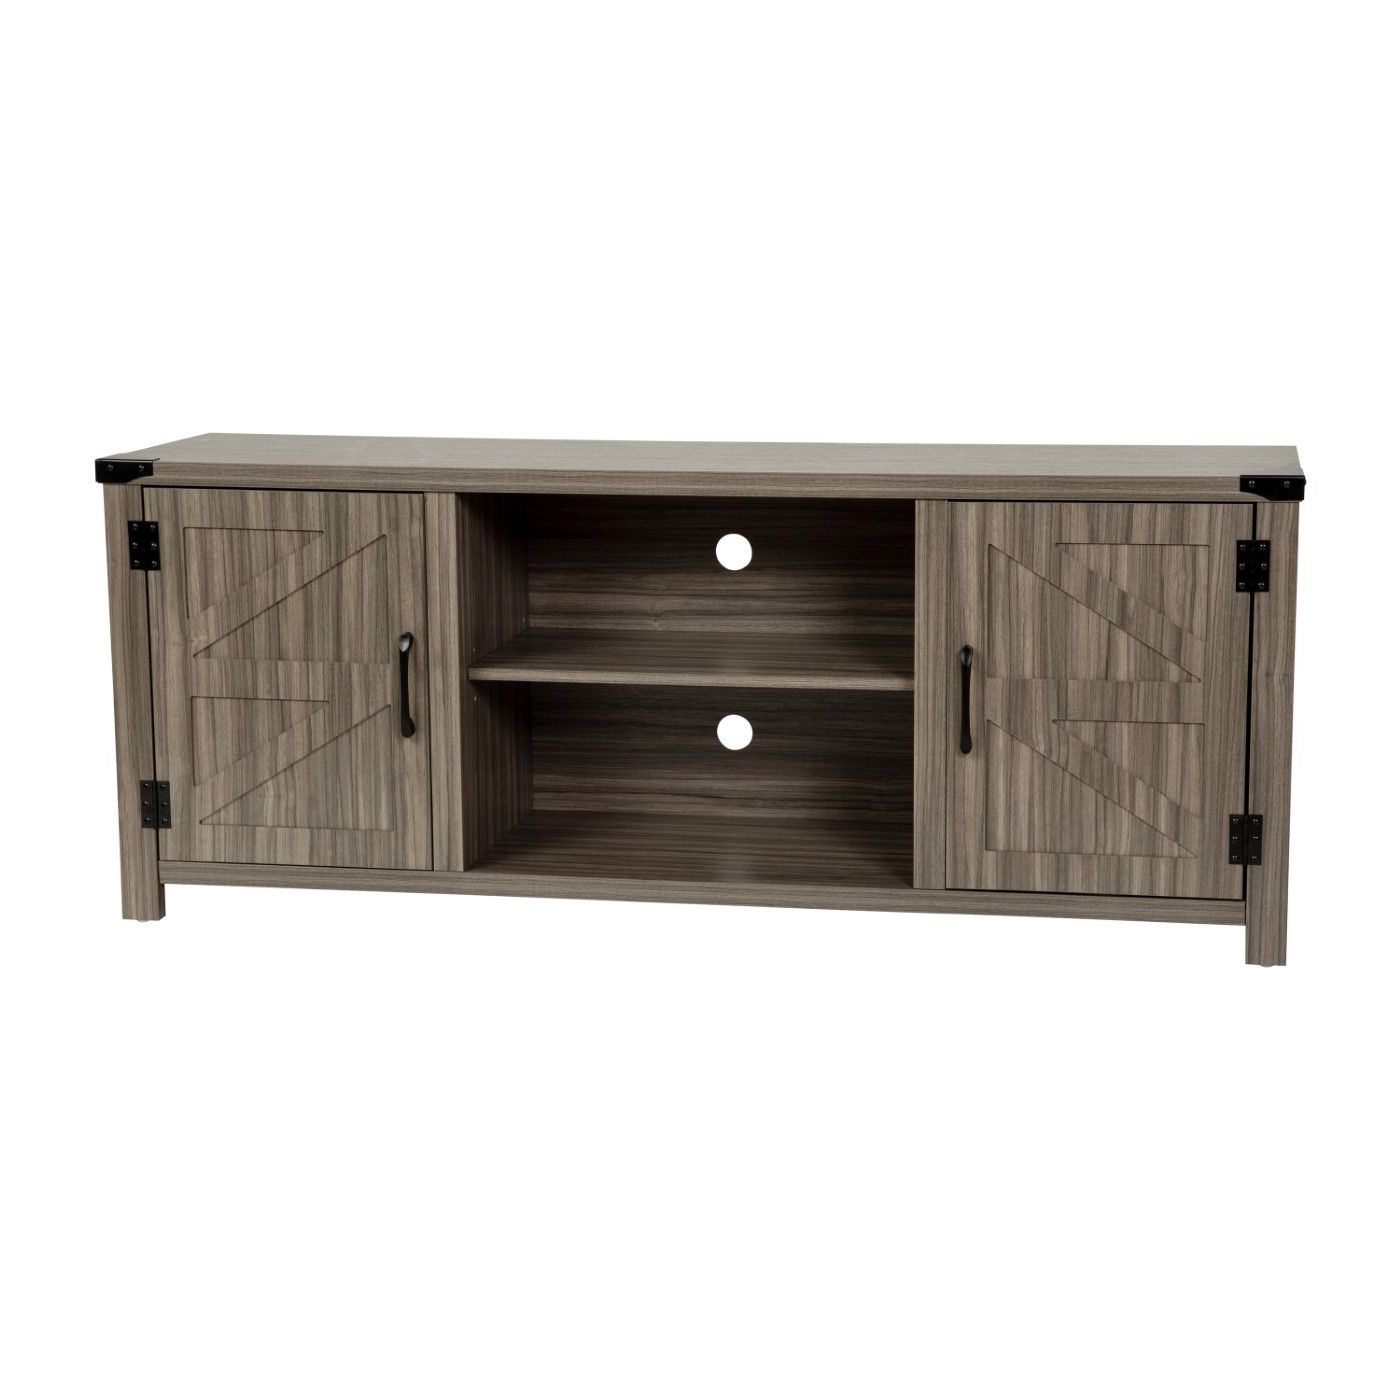 Ayrith Modern Farmhouse Barn Door Tv Stand – Gray Wash Oak For Tv's Up To  65 Inches – 59" Entertainment Center With Adjustable Shelf With Modern Farmhouse Barn Tv Stands (View 7 of 20)